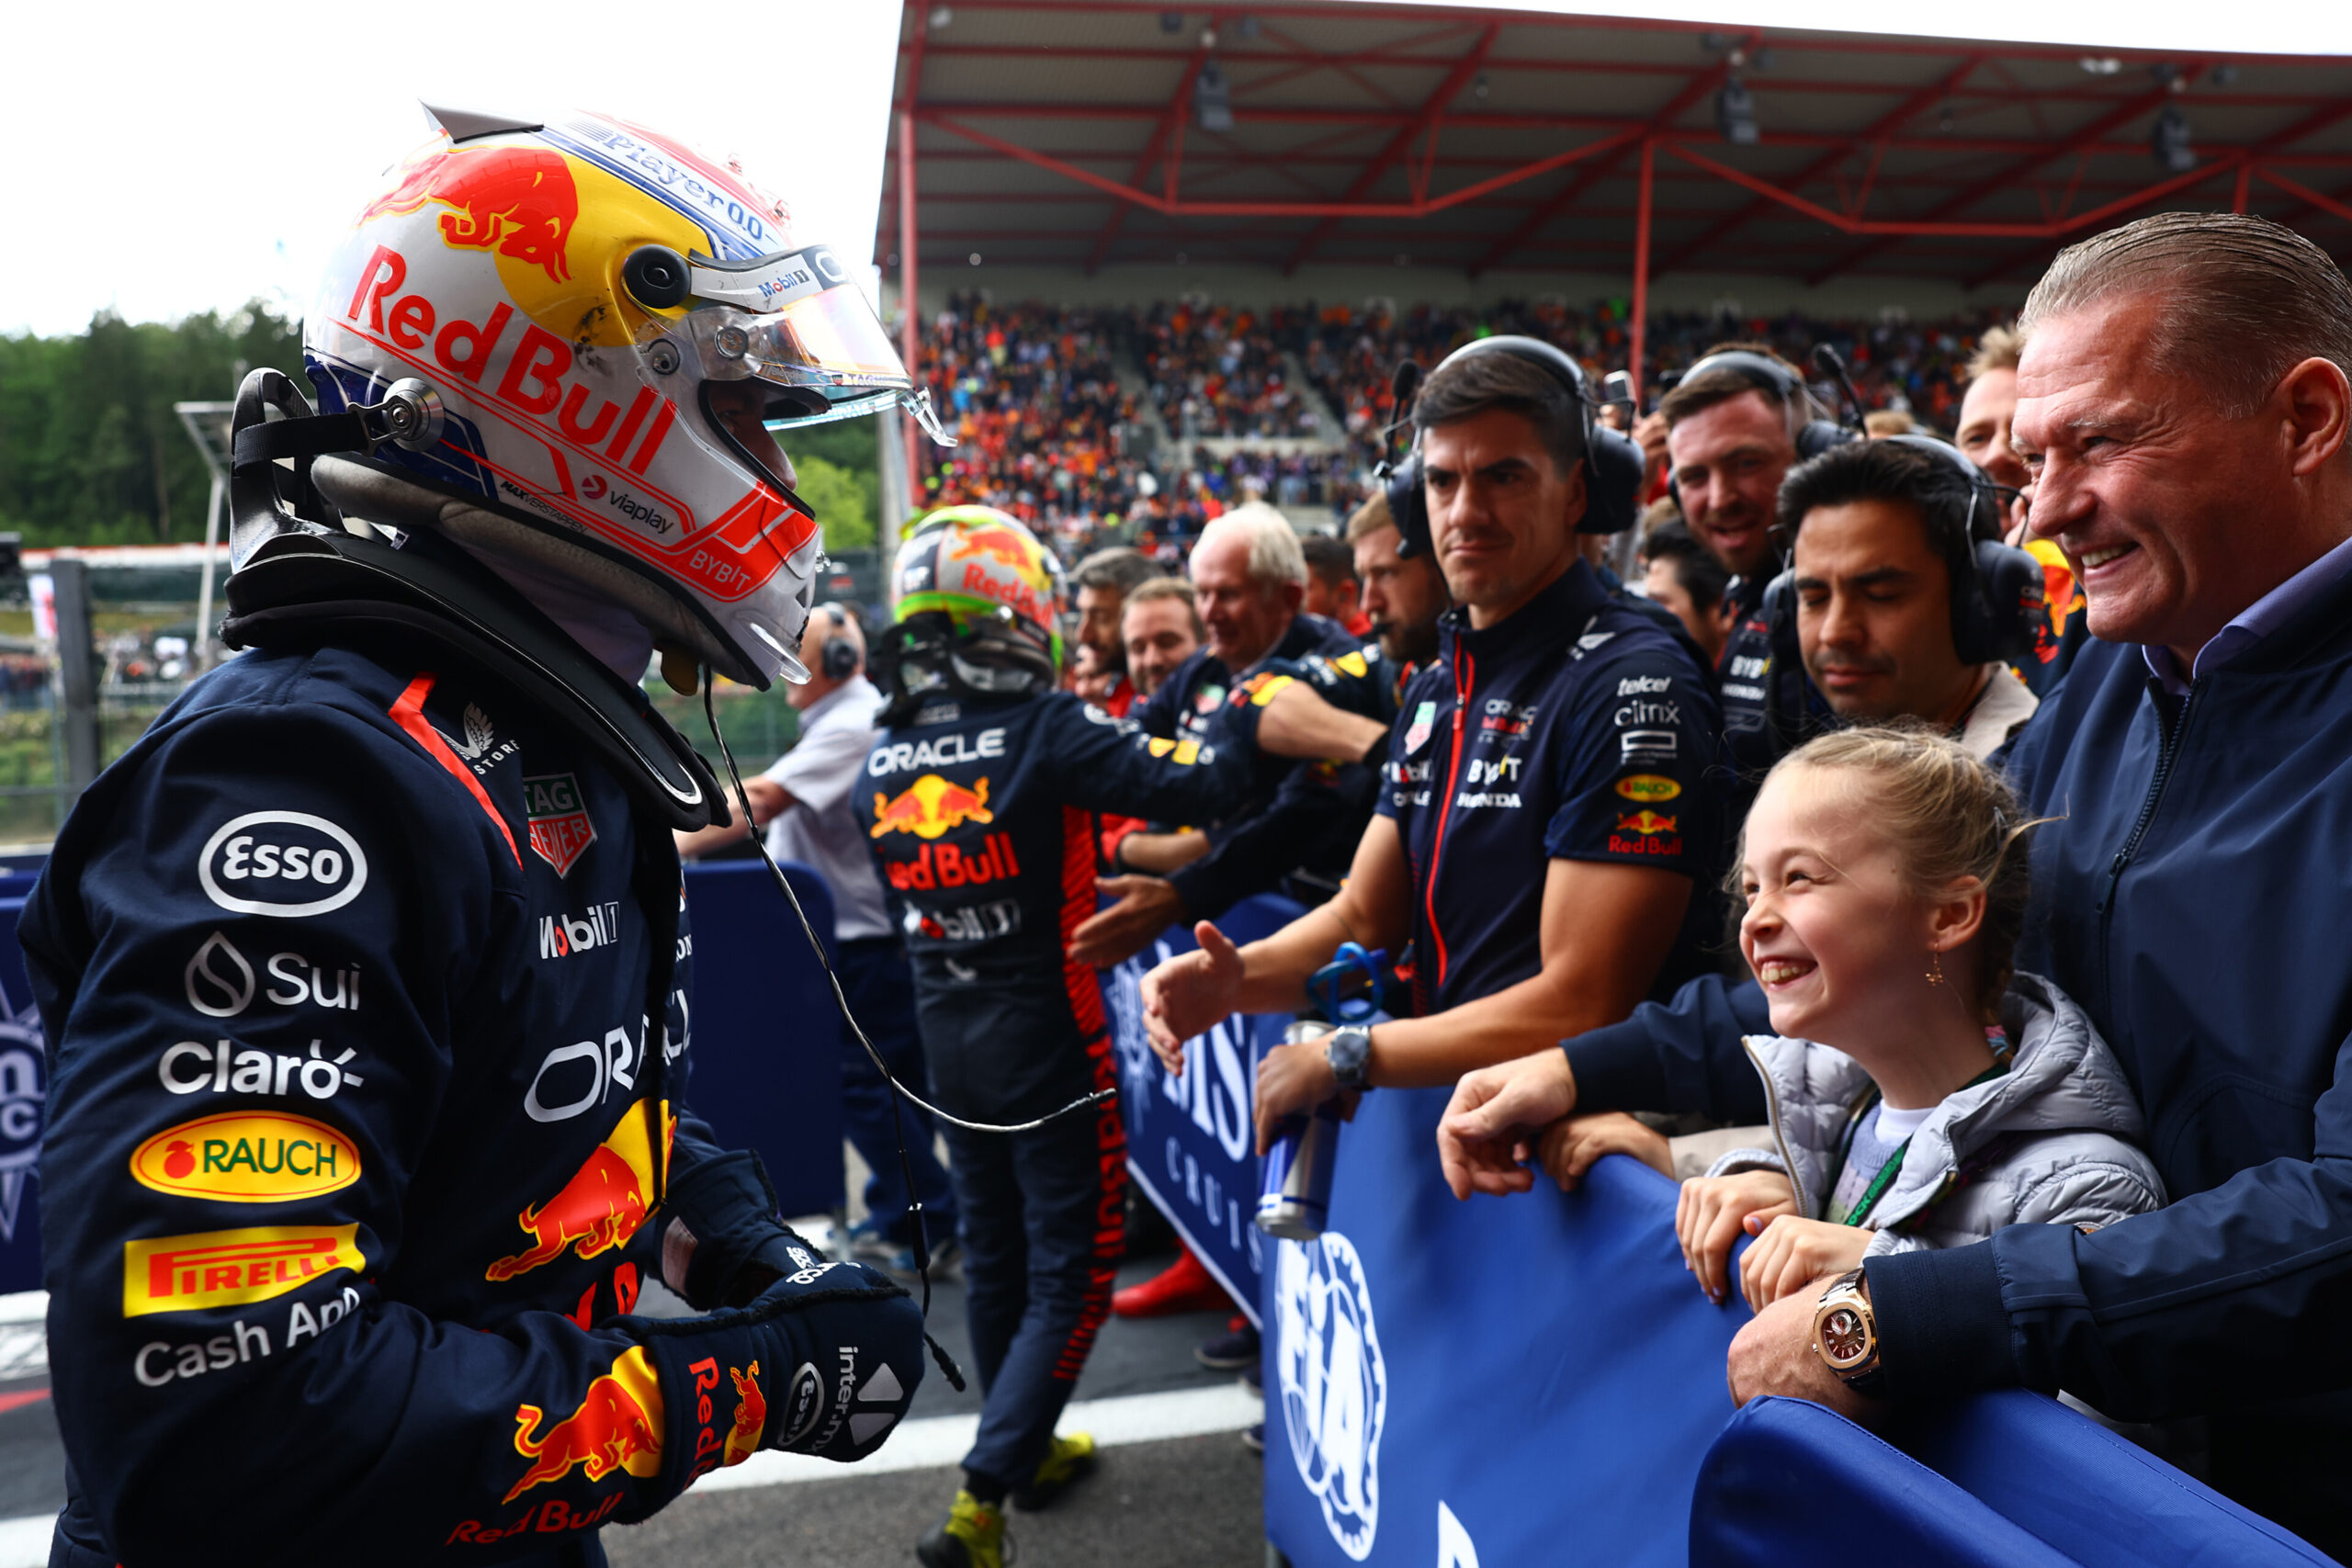 Max Verstappen after winning the Belgian Grand Prix with his dad and his sister